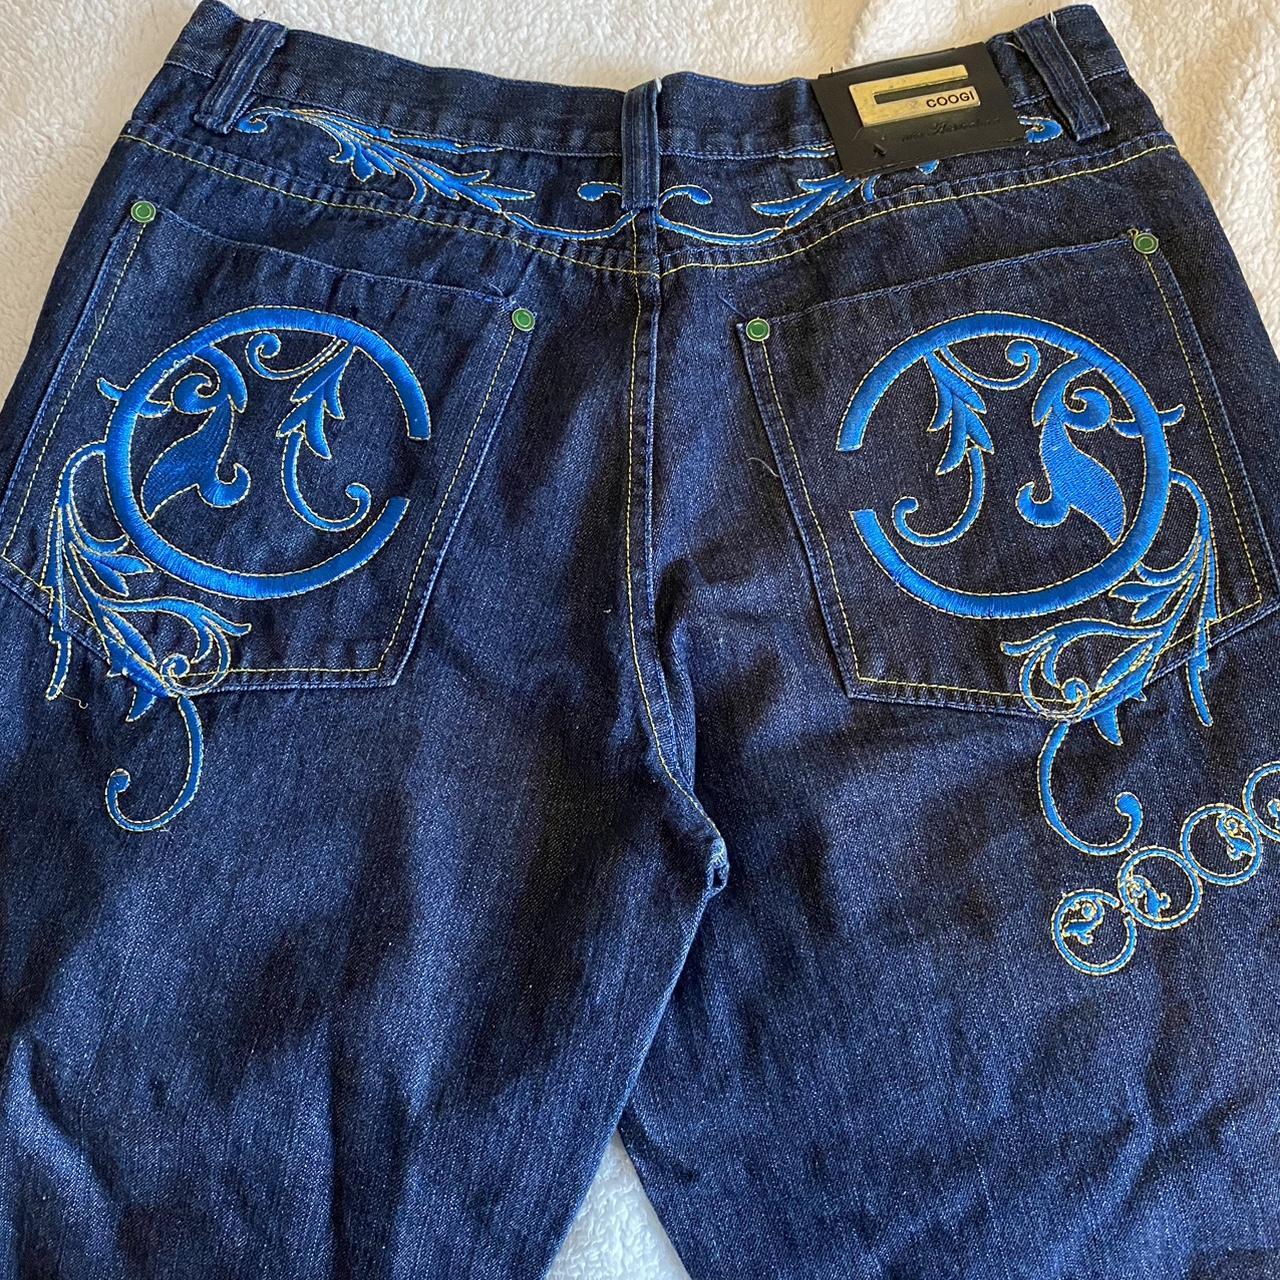 Msg Before buying!! - These Were My Pop’s jean’s... - Depop